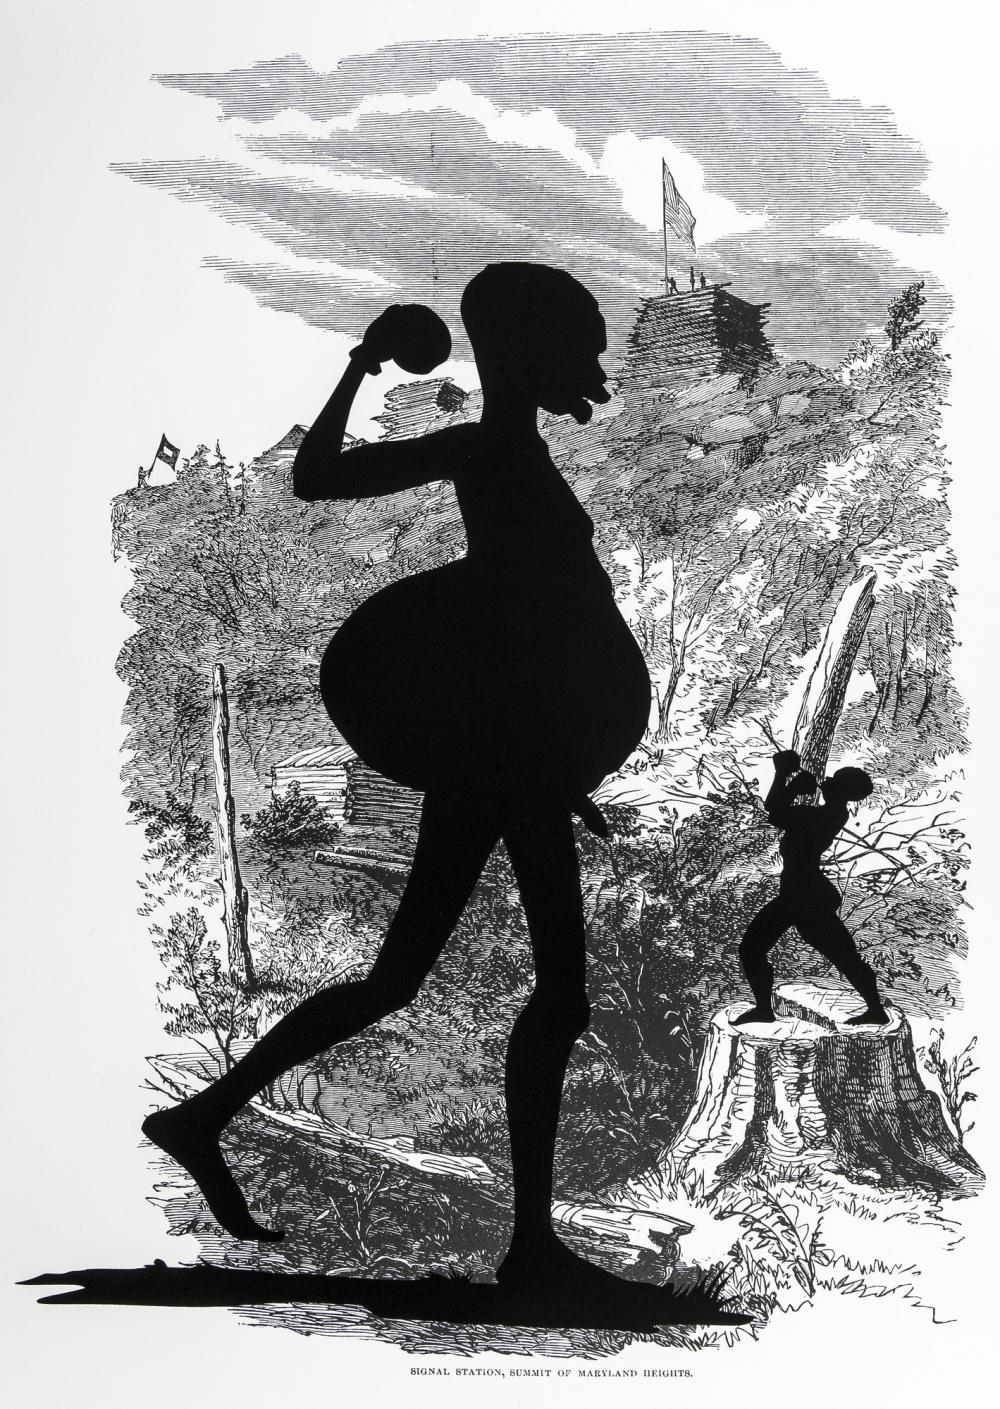 Kara Walker (American, b. 1969), Signal Station, Summit of Maryland Heights, from the series Harper's Pictorial History of the Civil War, 2005